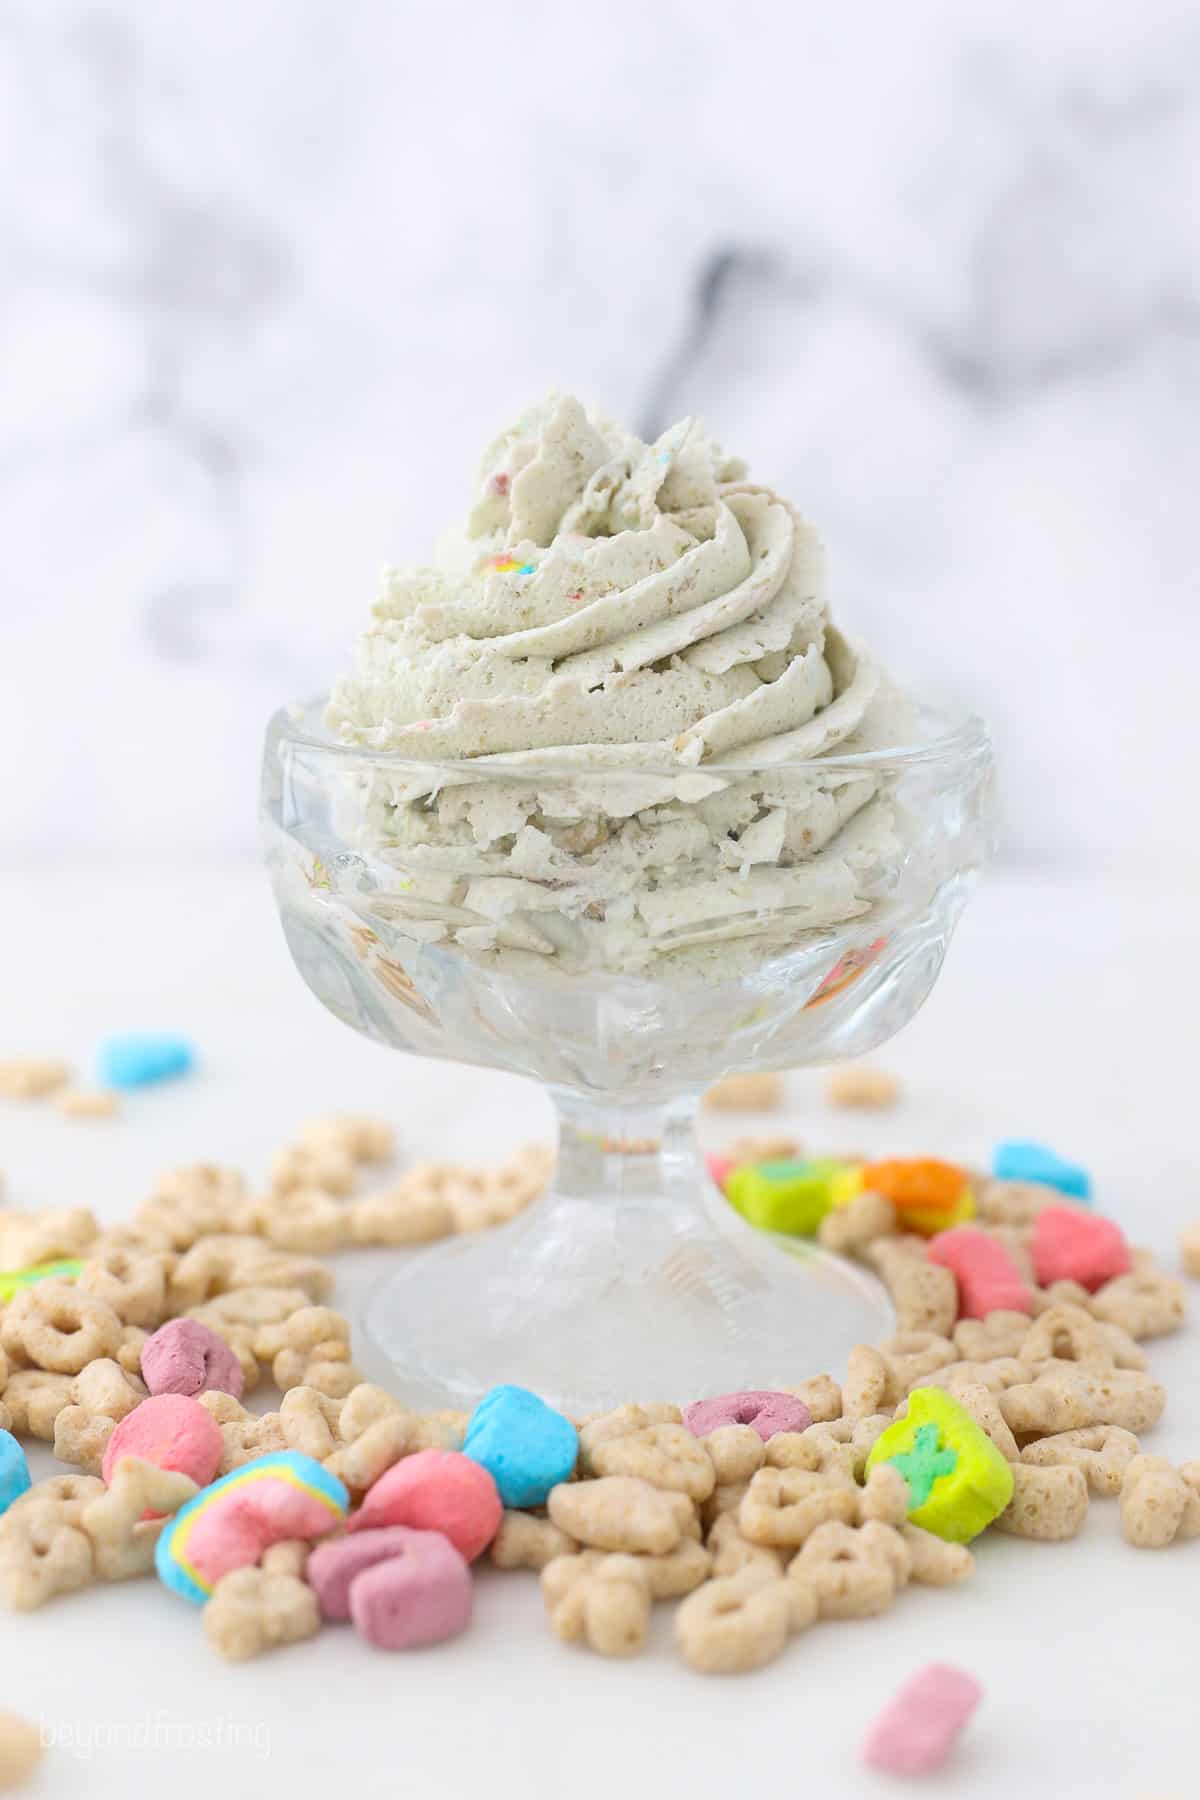 A piped swirl of cereal milk whipped cream in a glass bowl on a countertop, surrounded by Lucky Charms cereal.